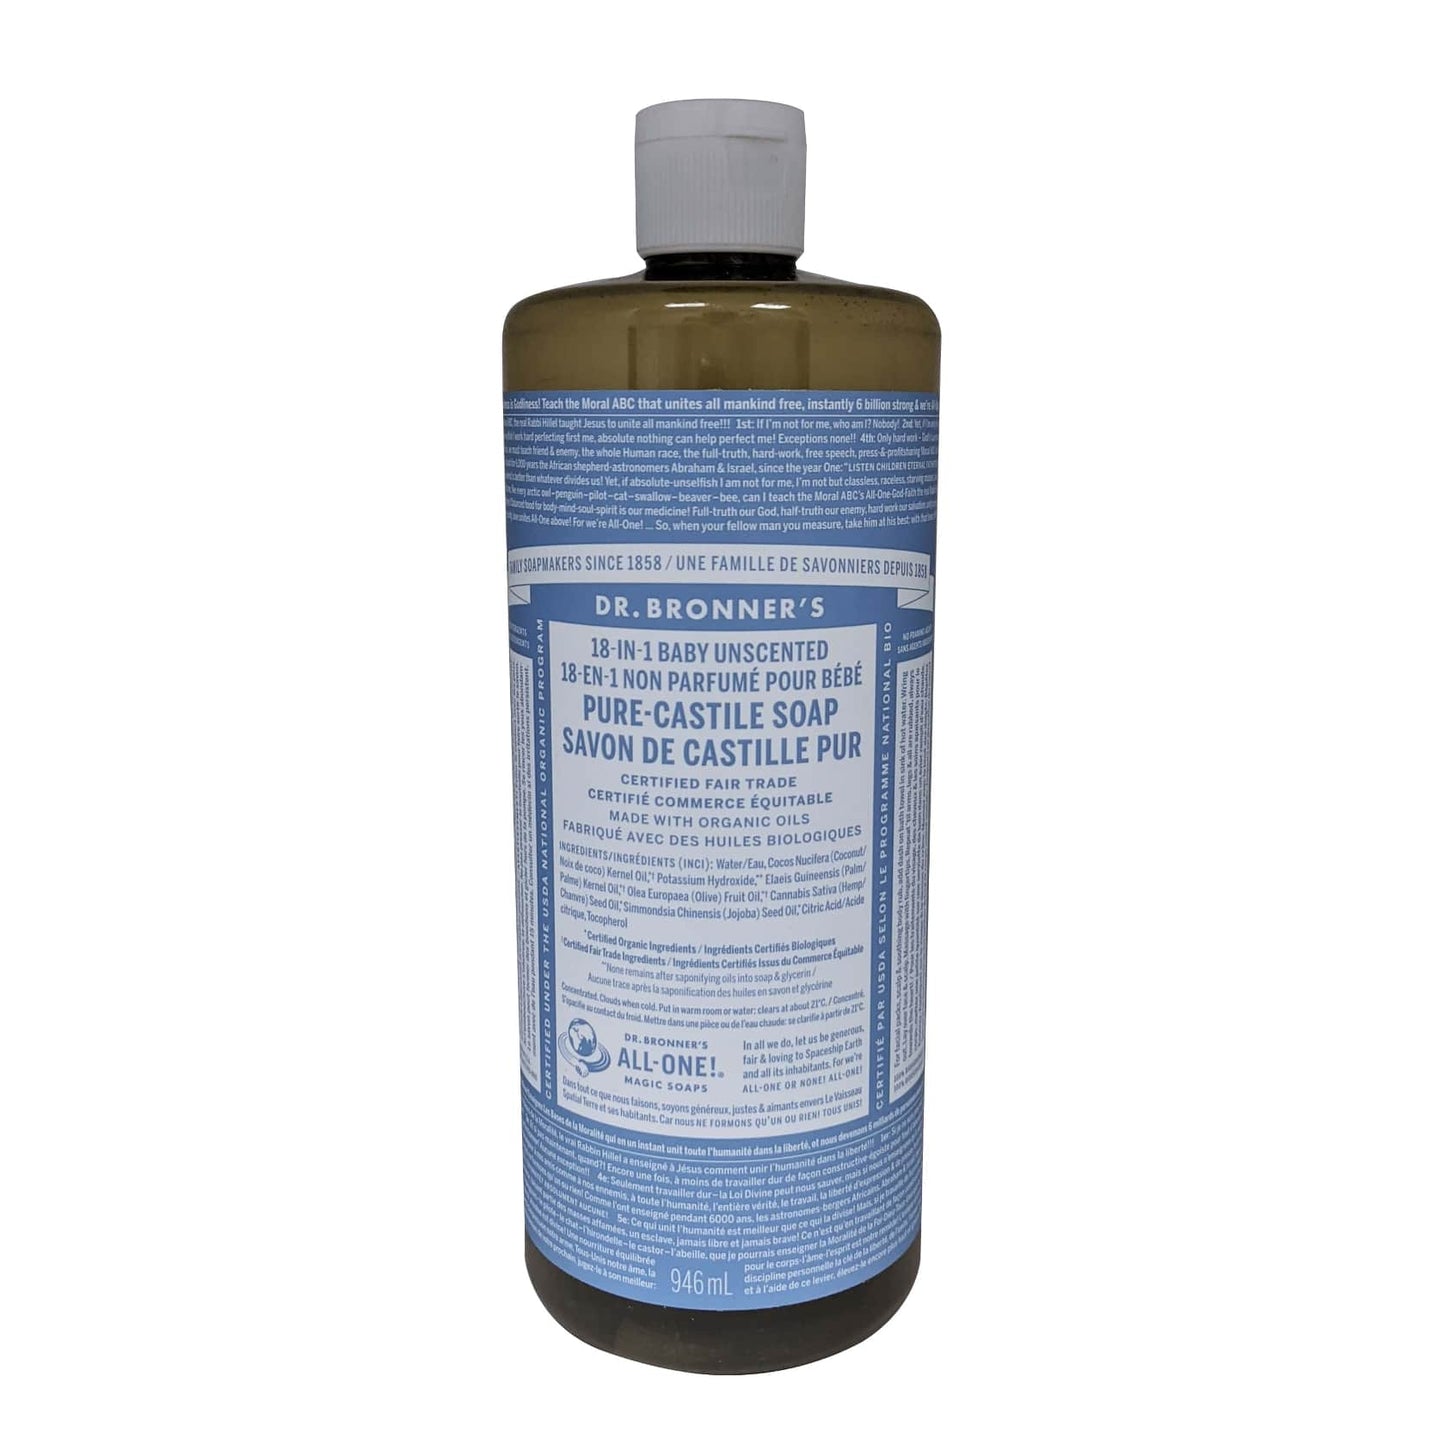 Product label for Dr. Bronner's Baby Unscented Pure Castile Liquid Soap 